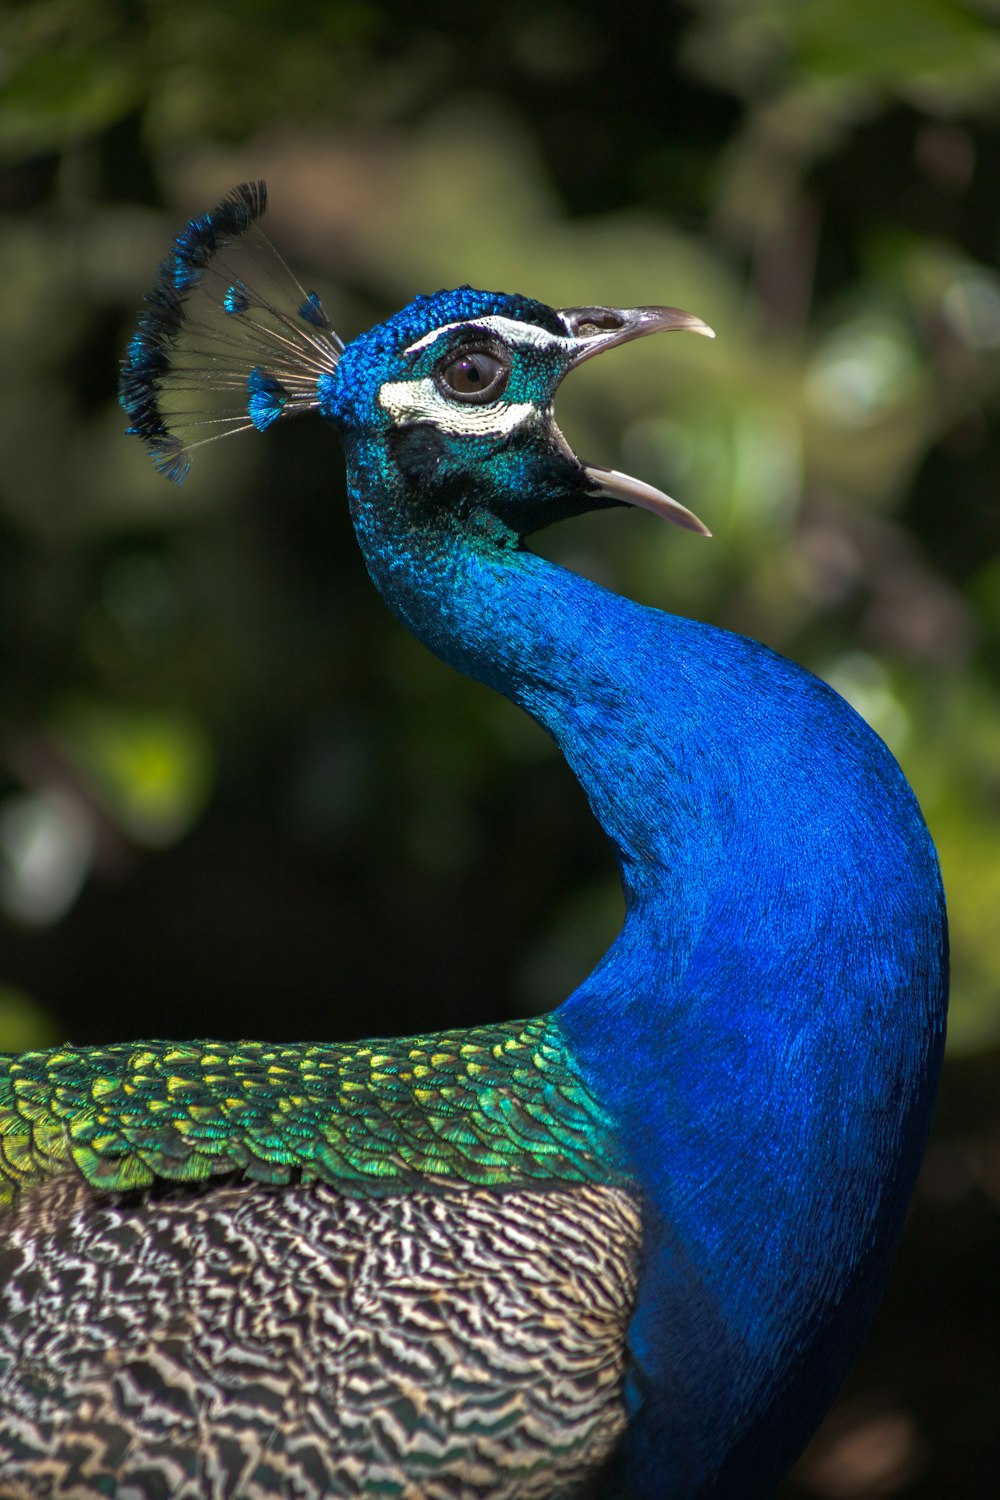 a close up of a peacock with a tree in the background